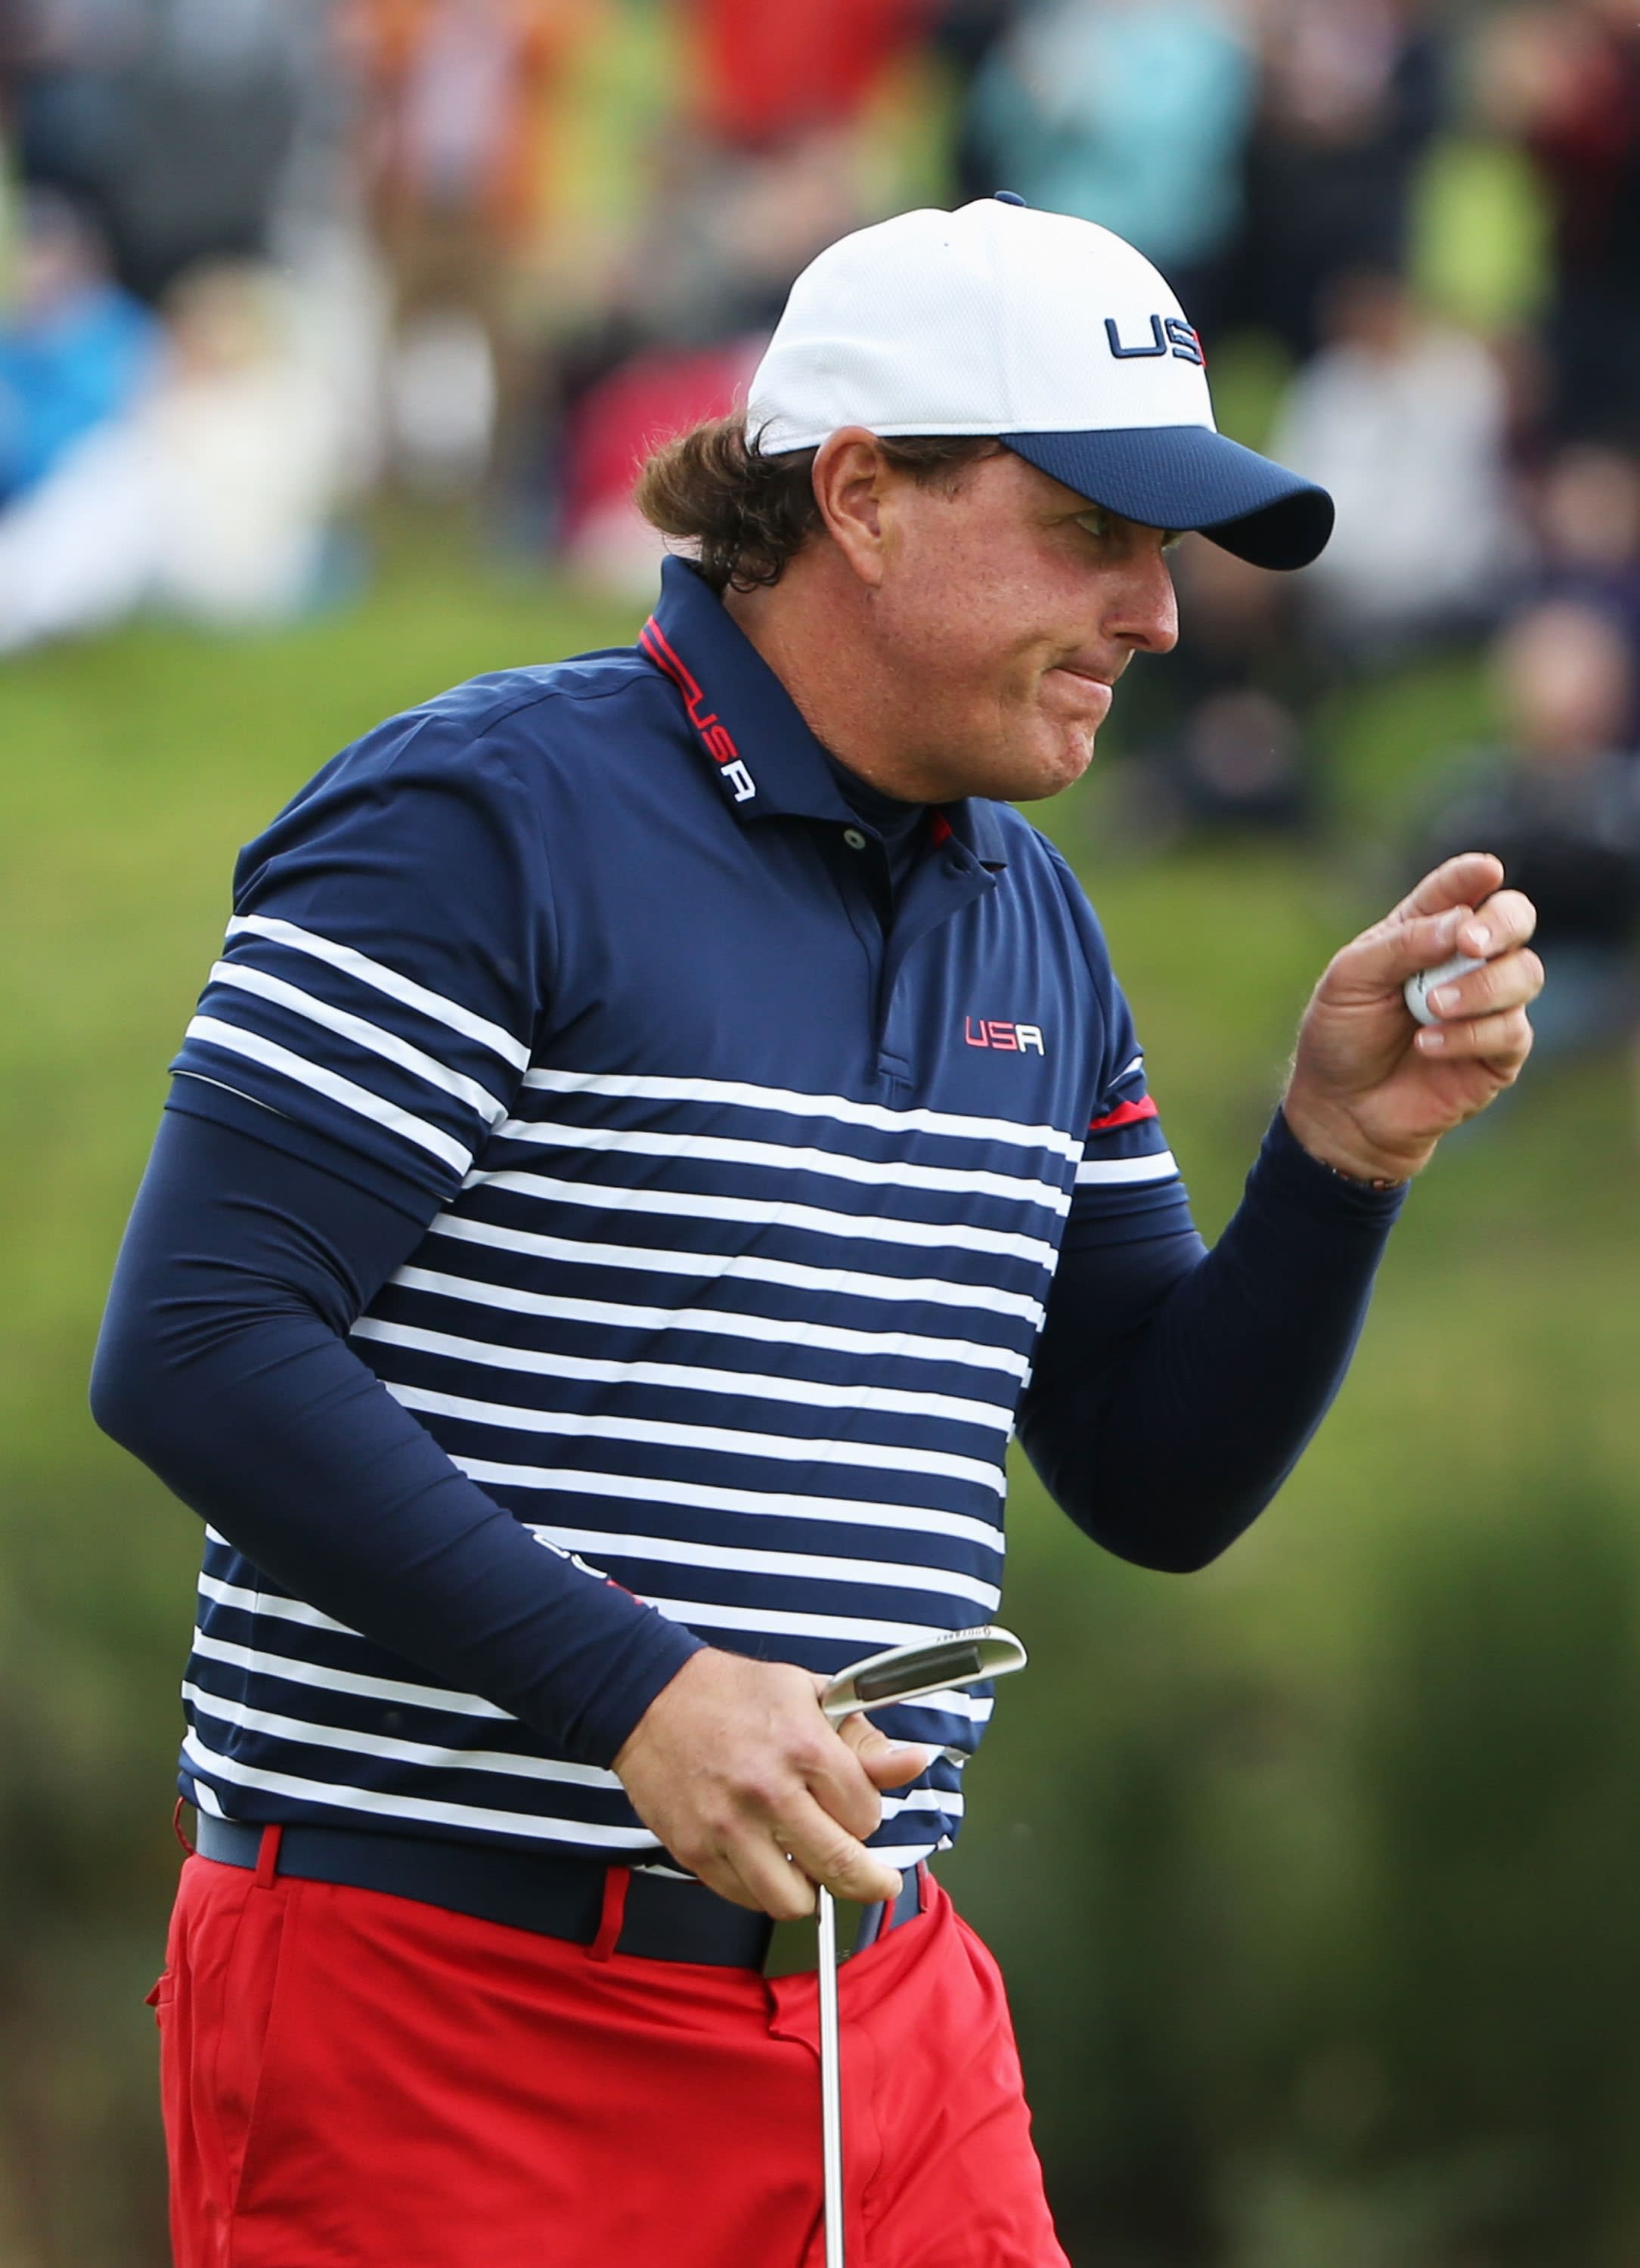 Phil Mickelson halfway to goal of dropping 20 lbs.